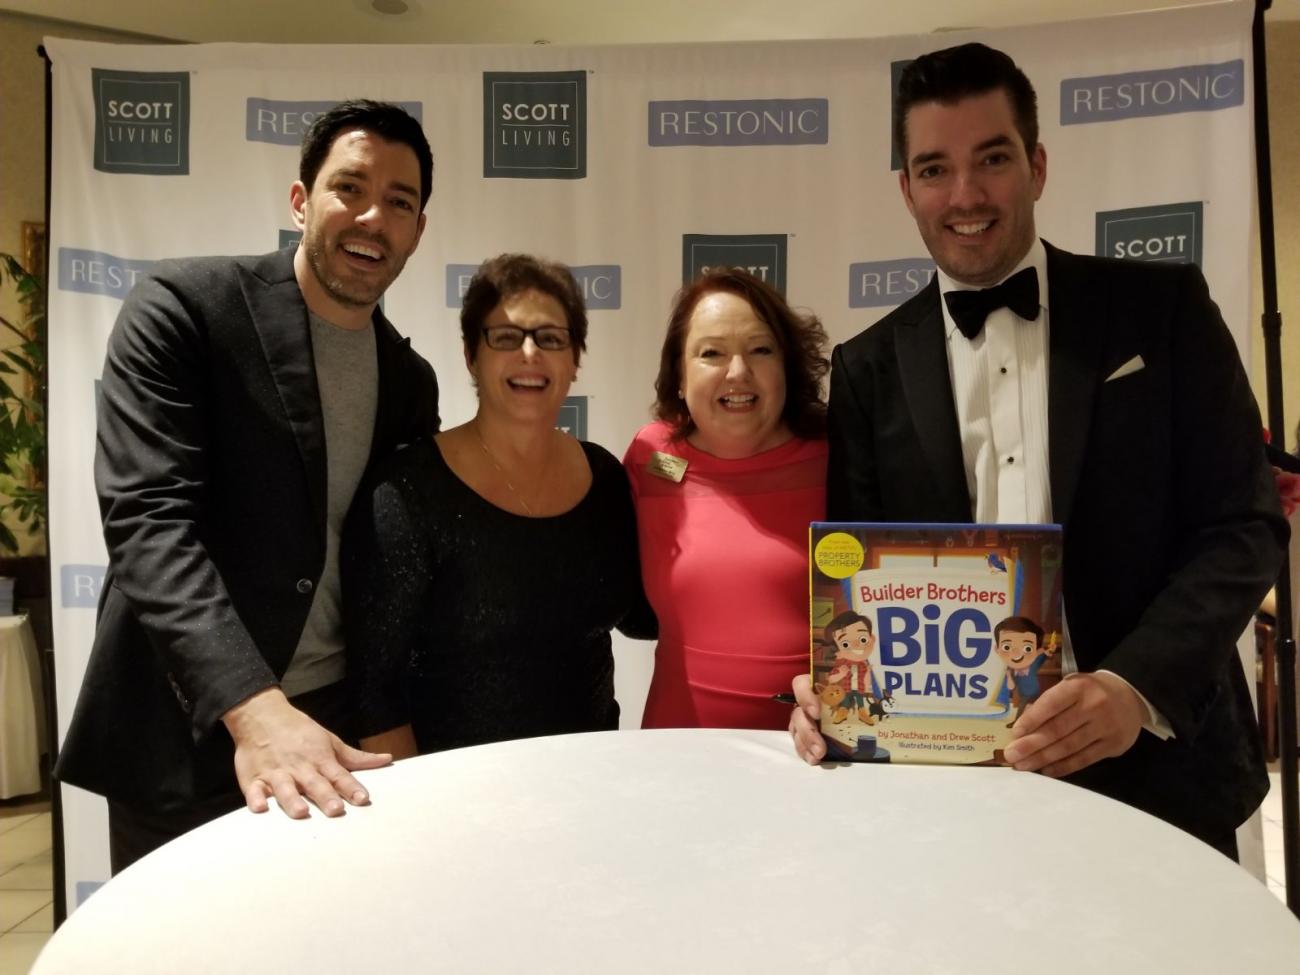 Property Brothers children's book